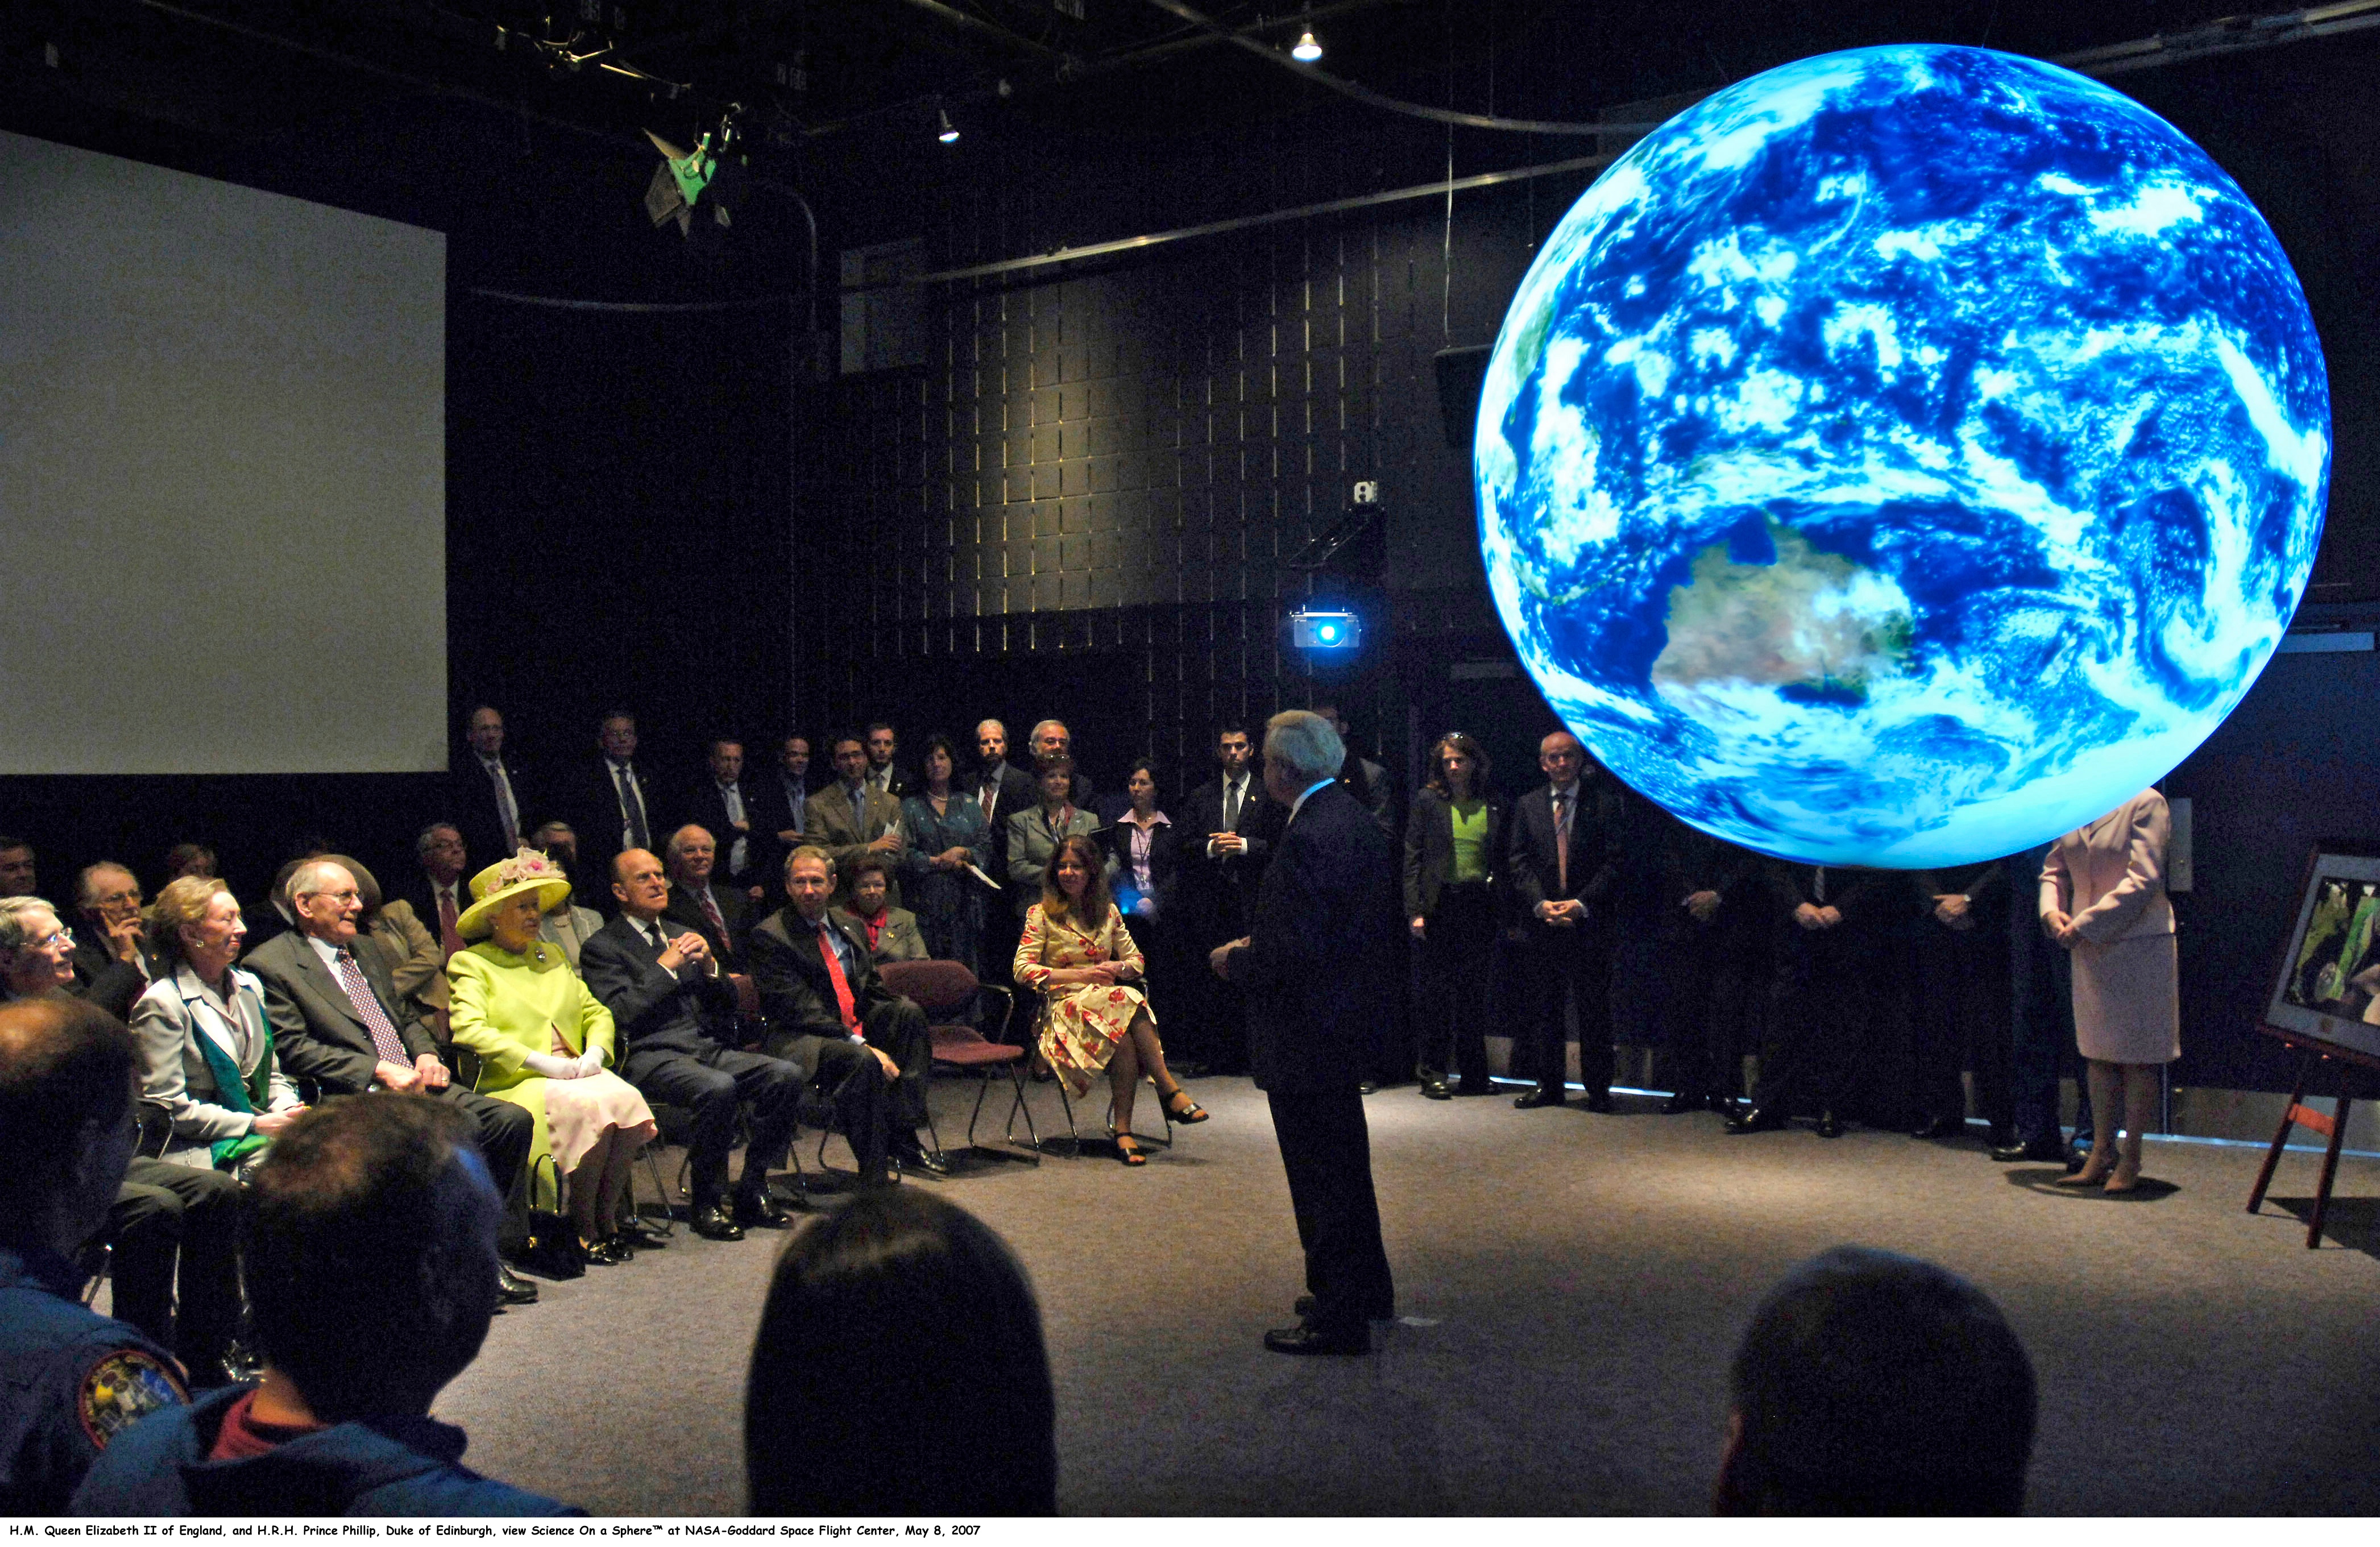 A group of people sit and stand around Science On a Sphere as it displays satellite imagery of Earth in a theater. One man stands in front of the Sphere facing the audience. Queen Elizabeth II is seated in the front row, wearing a lime green jacket and matching hat; seated to her left is Prince Phillip in a dark suit